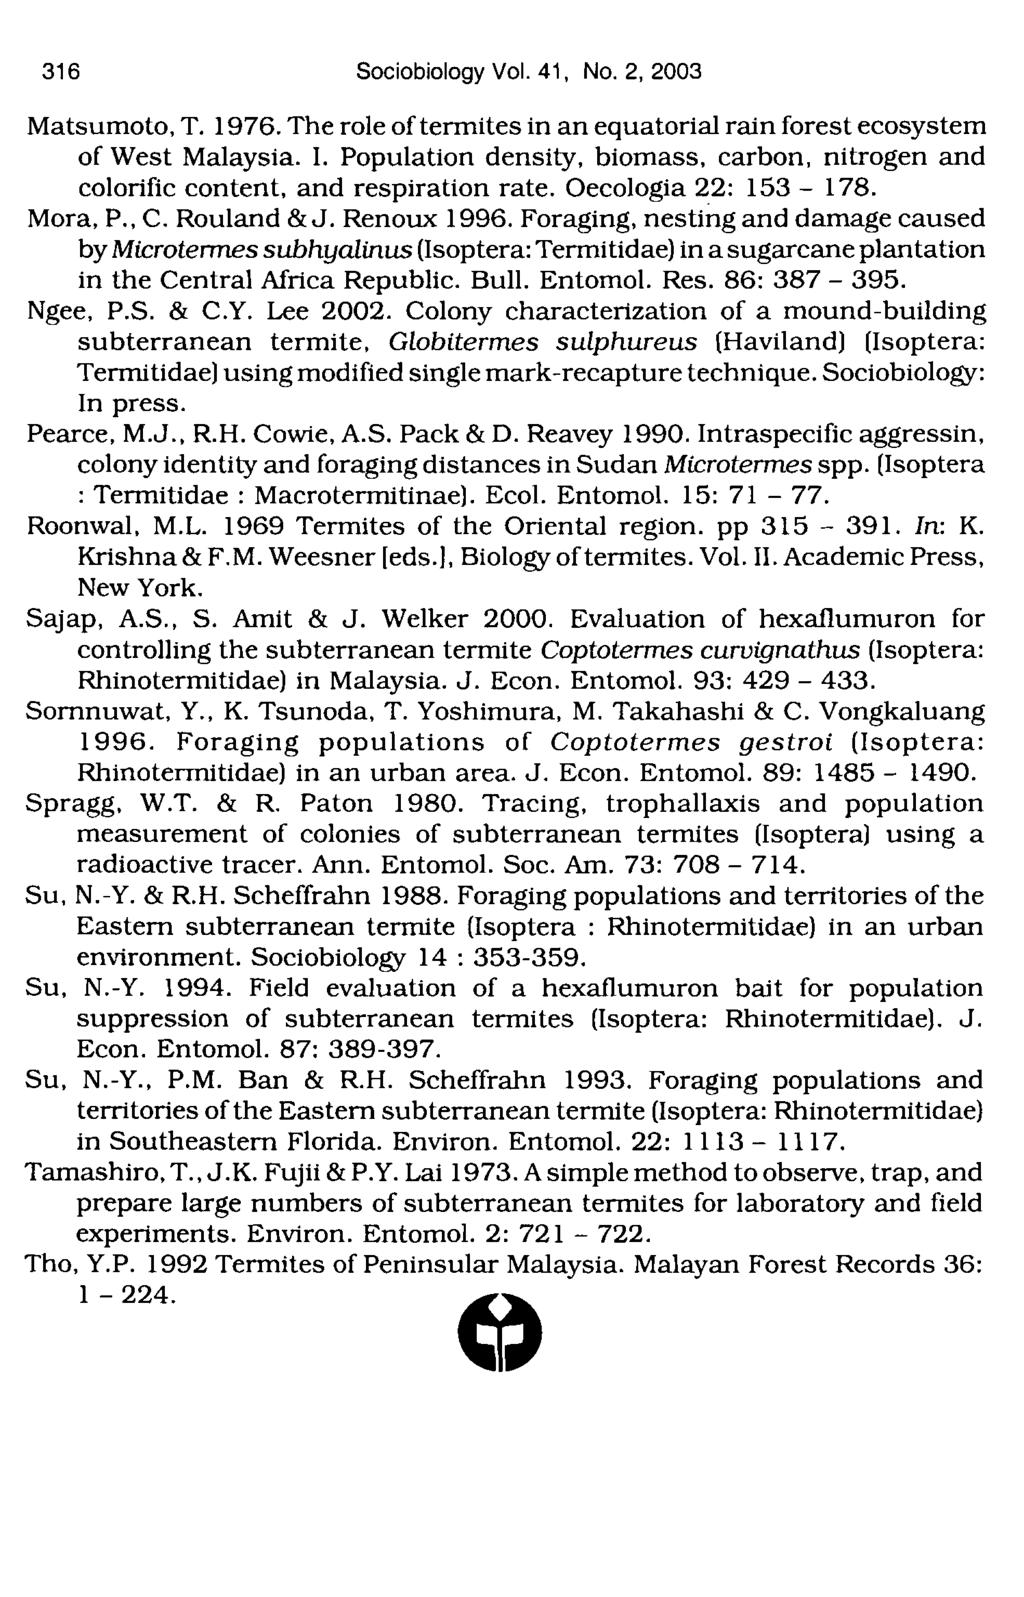 31 6 Sociobiology Vol. 41, No. 2, 2003 Matsumoto, T. 1976. The role of termites in an equatorial rain forest ecosystem of West Malaysia. I.